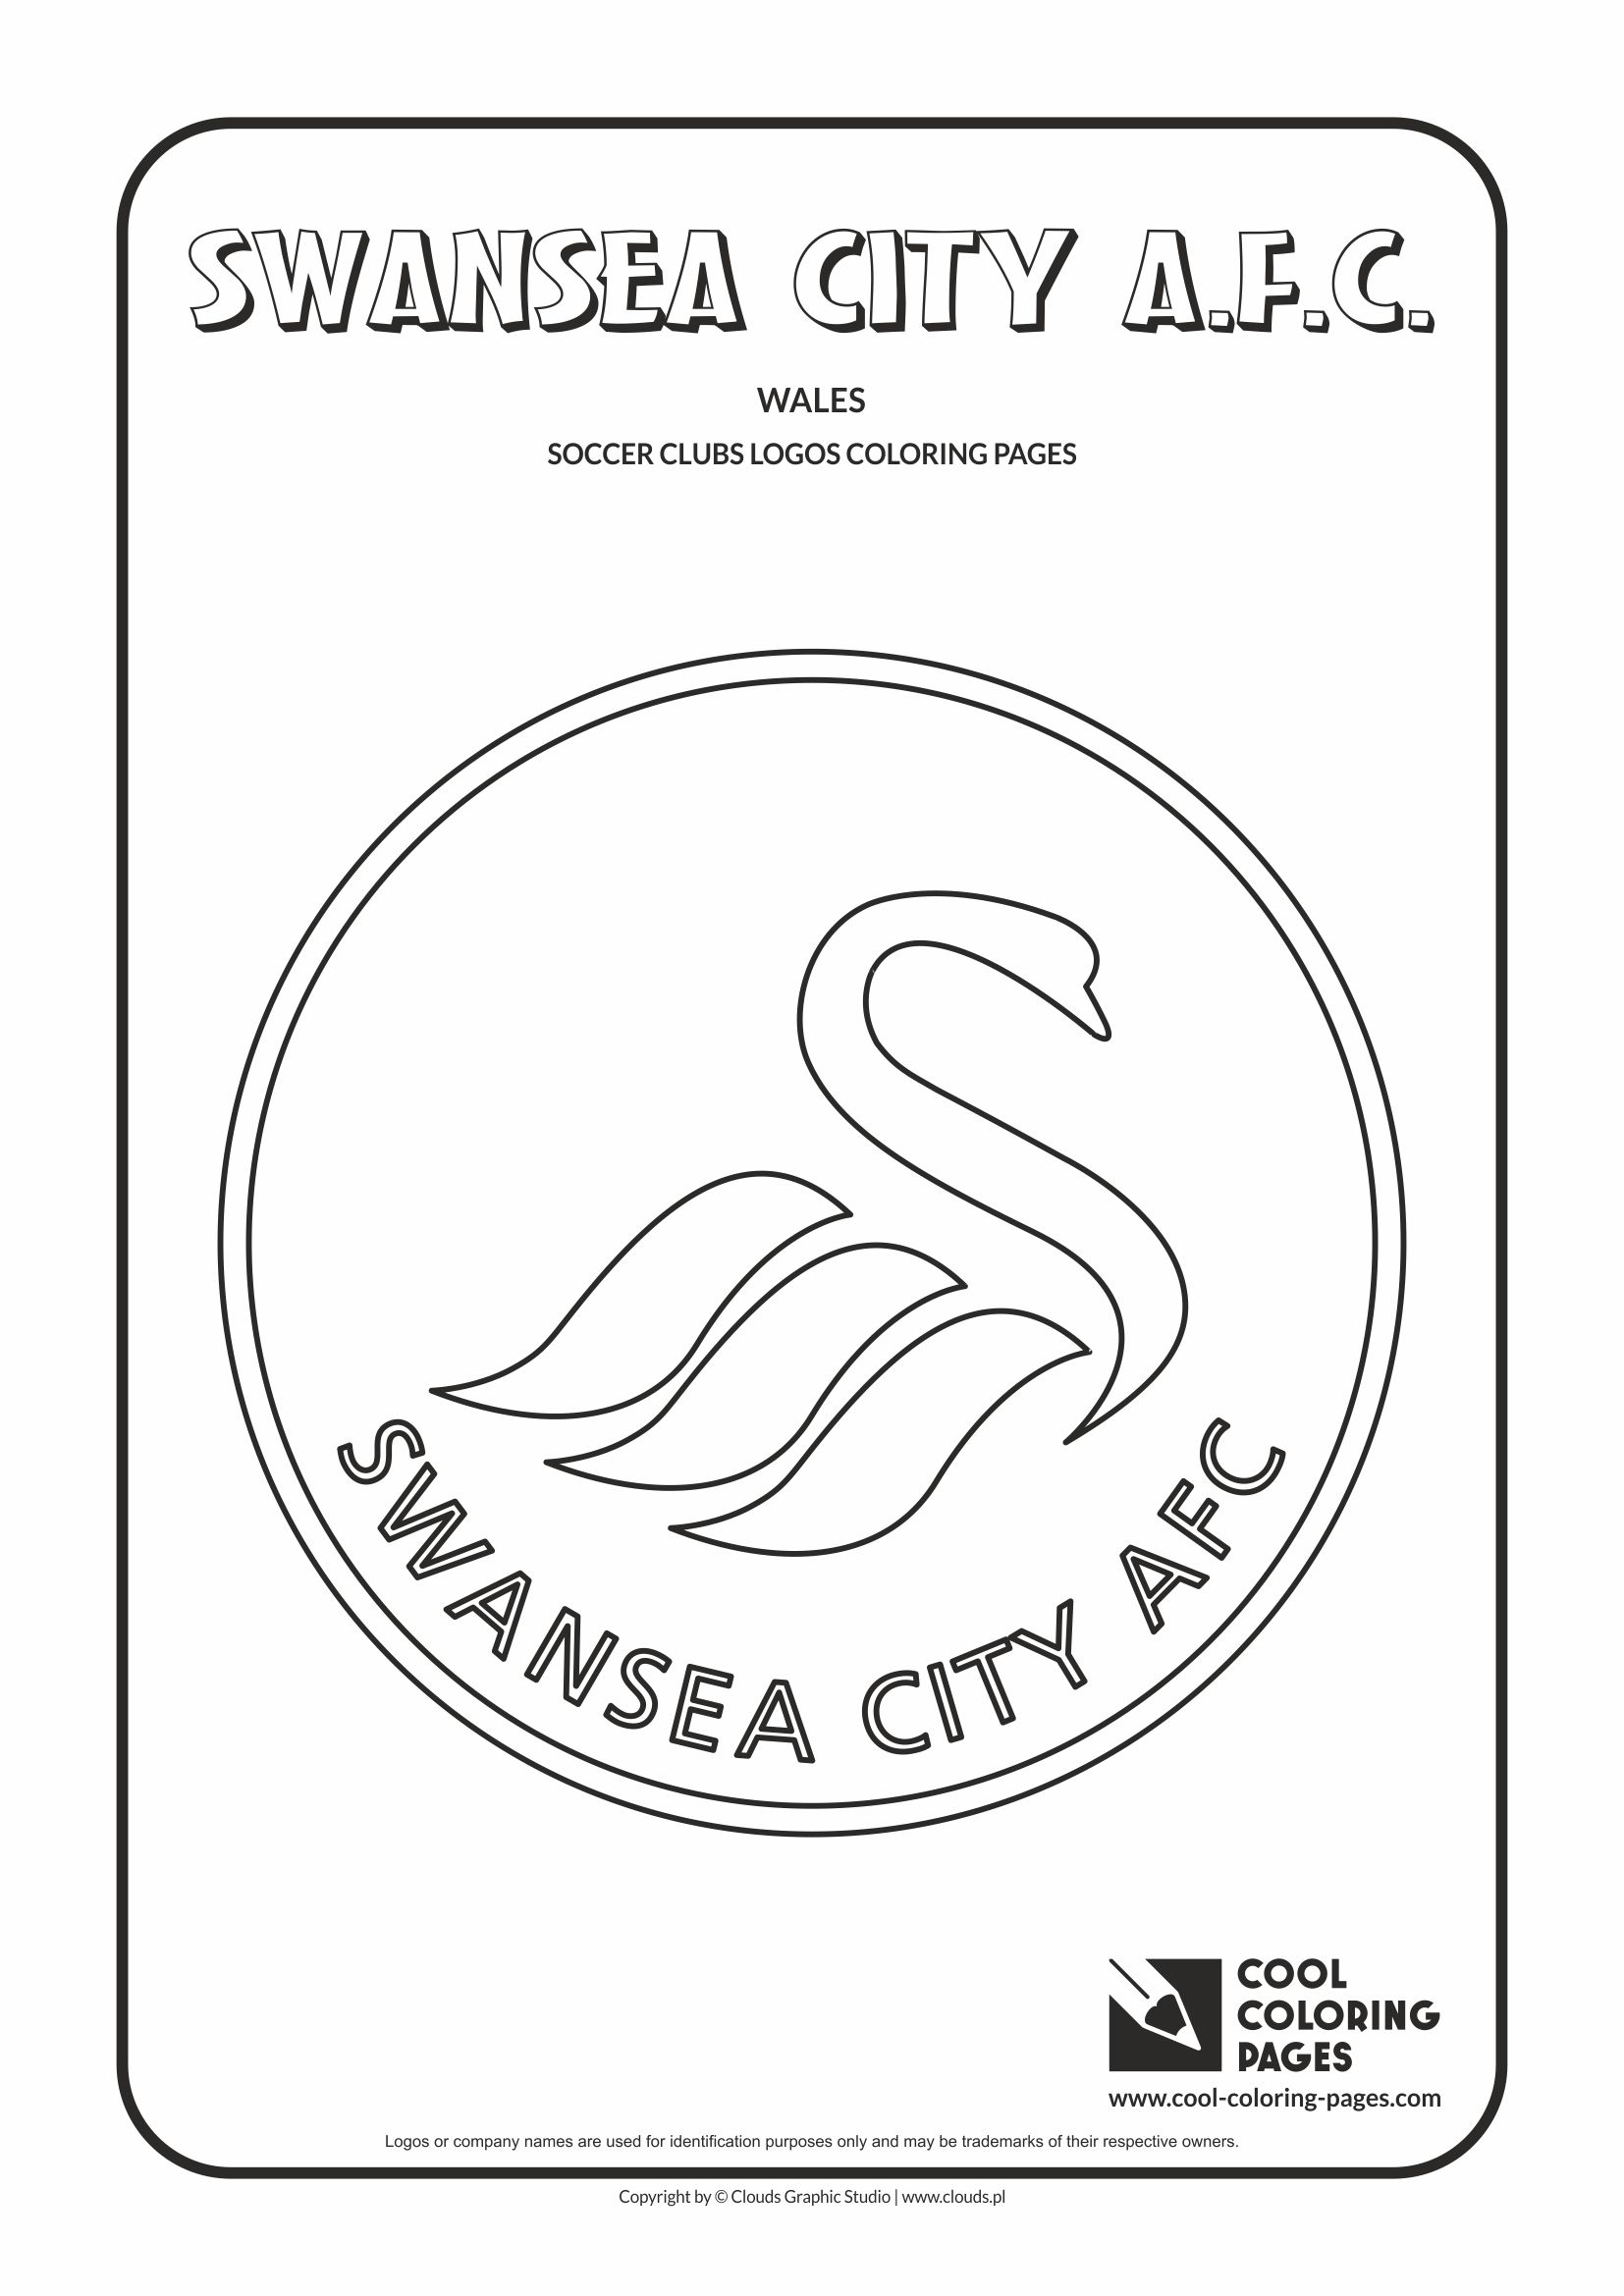 Swansea City A.F.C. logo coloring / Coloring page with Swansea City A.F.C. logo / Swansea City A.F.C. logo colouring page.